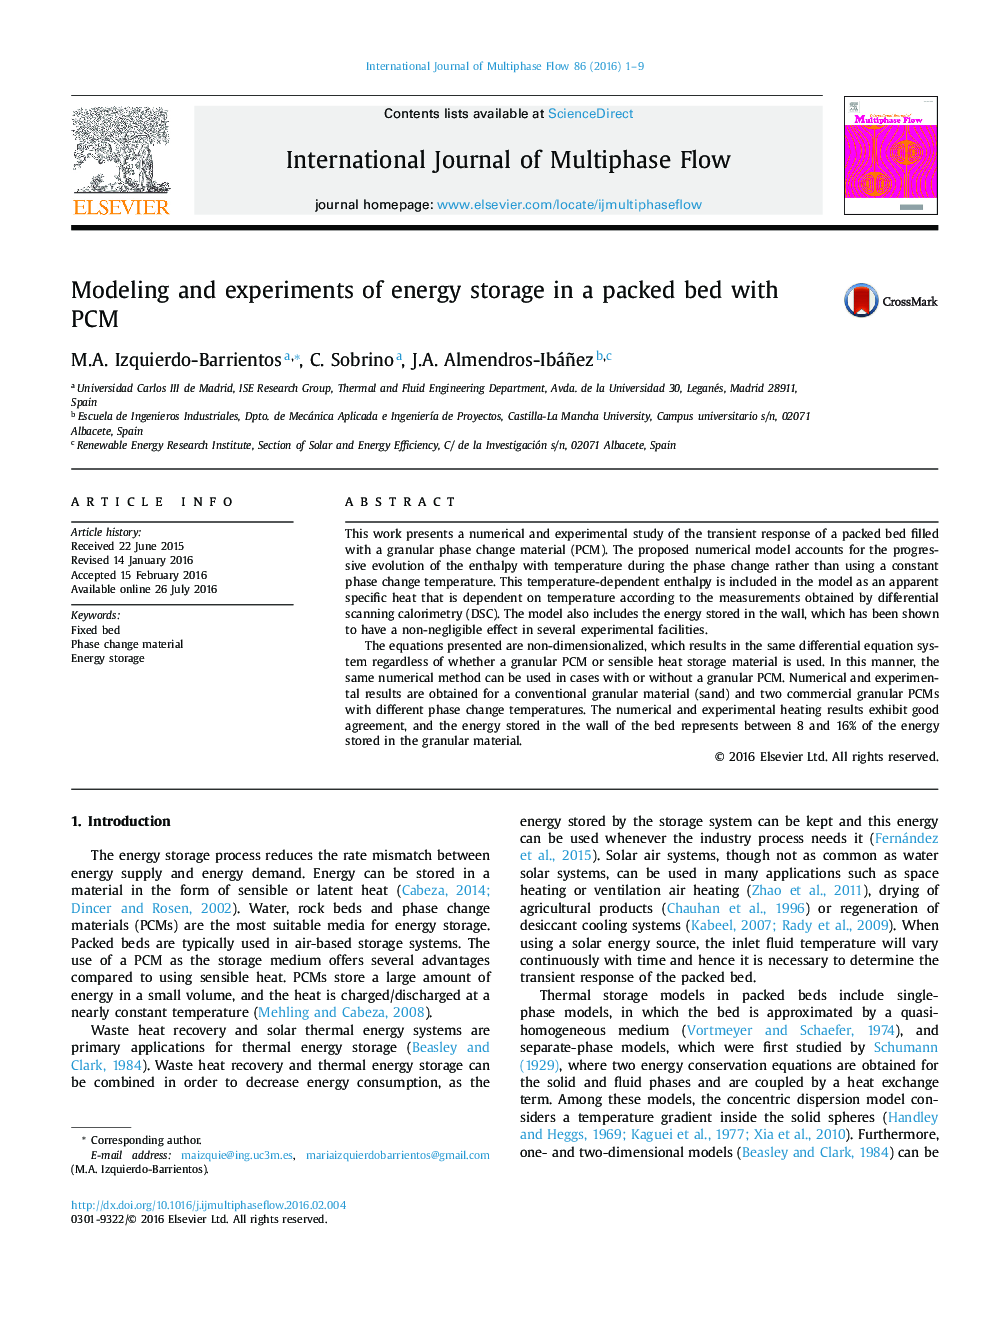 Modeling and experiments of energy storage in a packed bed with PCM